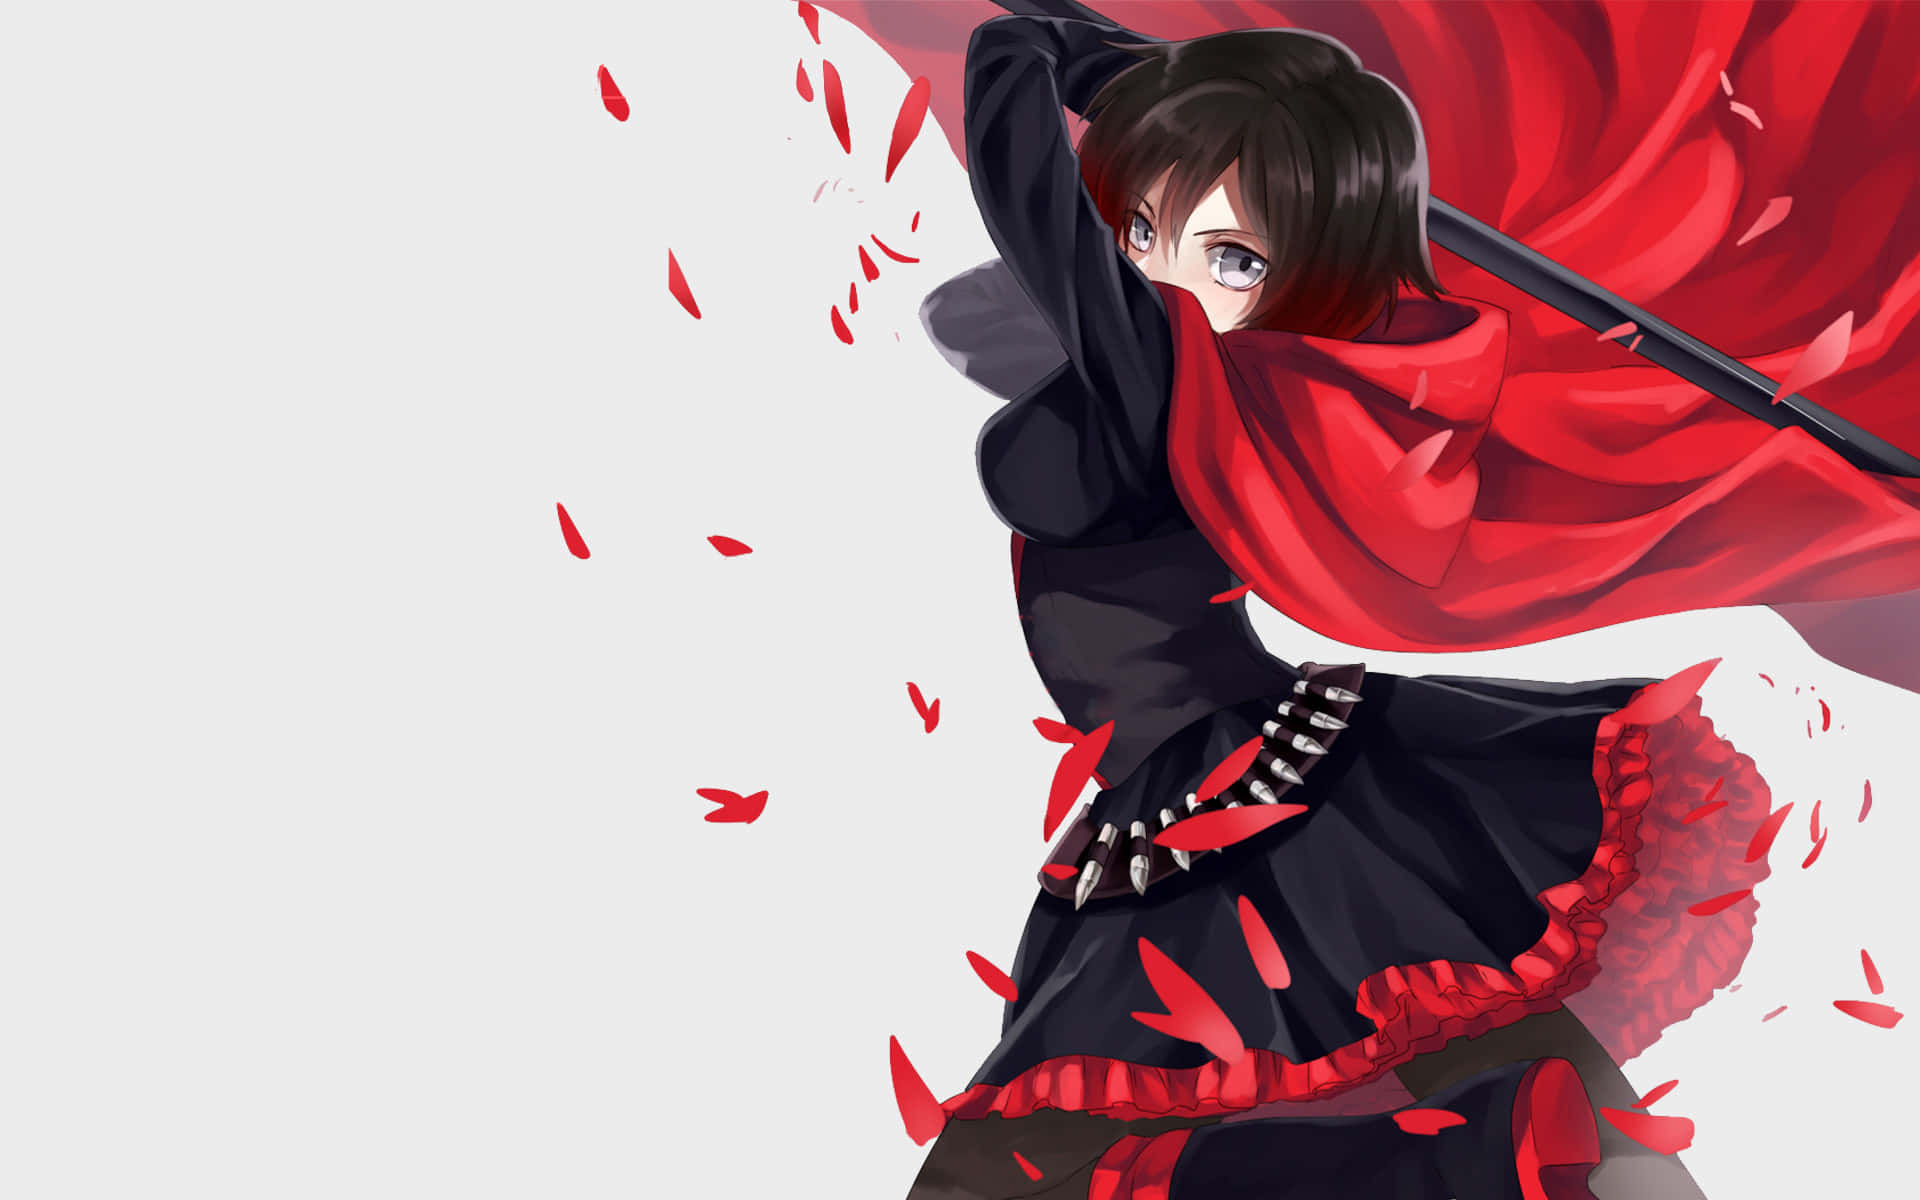 Anime Girl With Red Cape And Sword